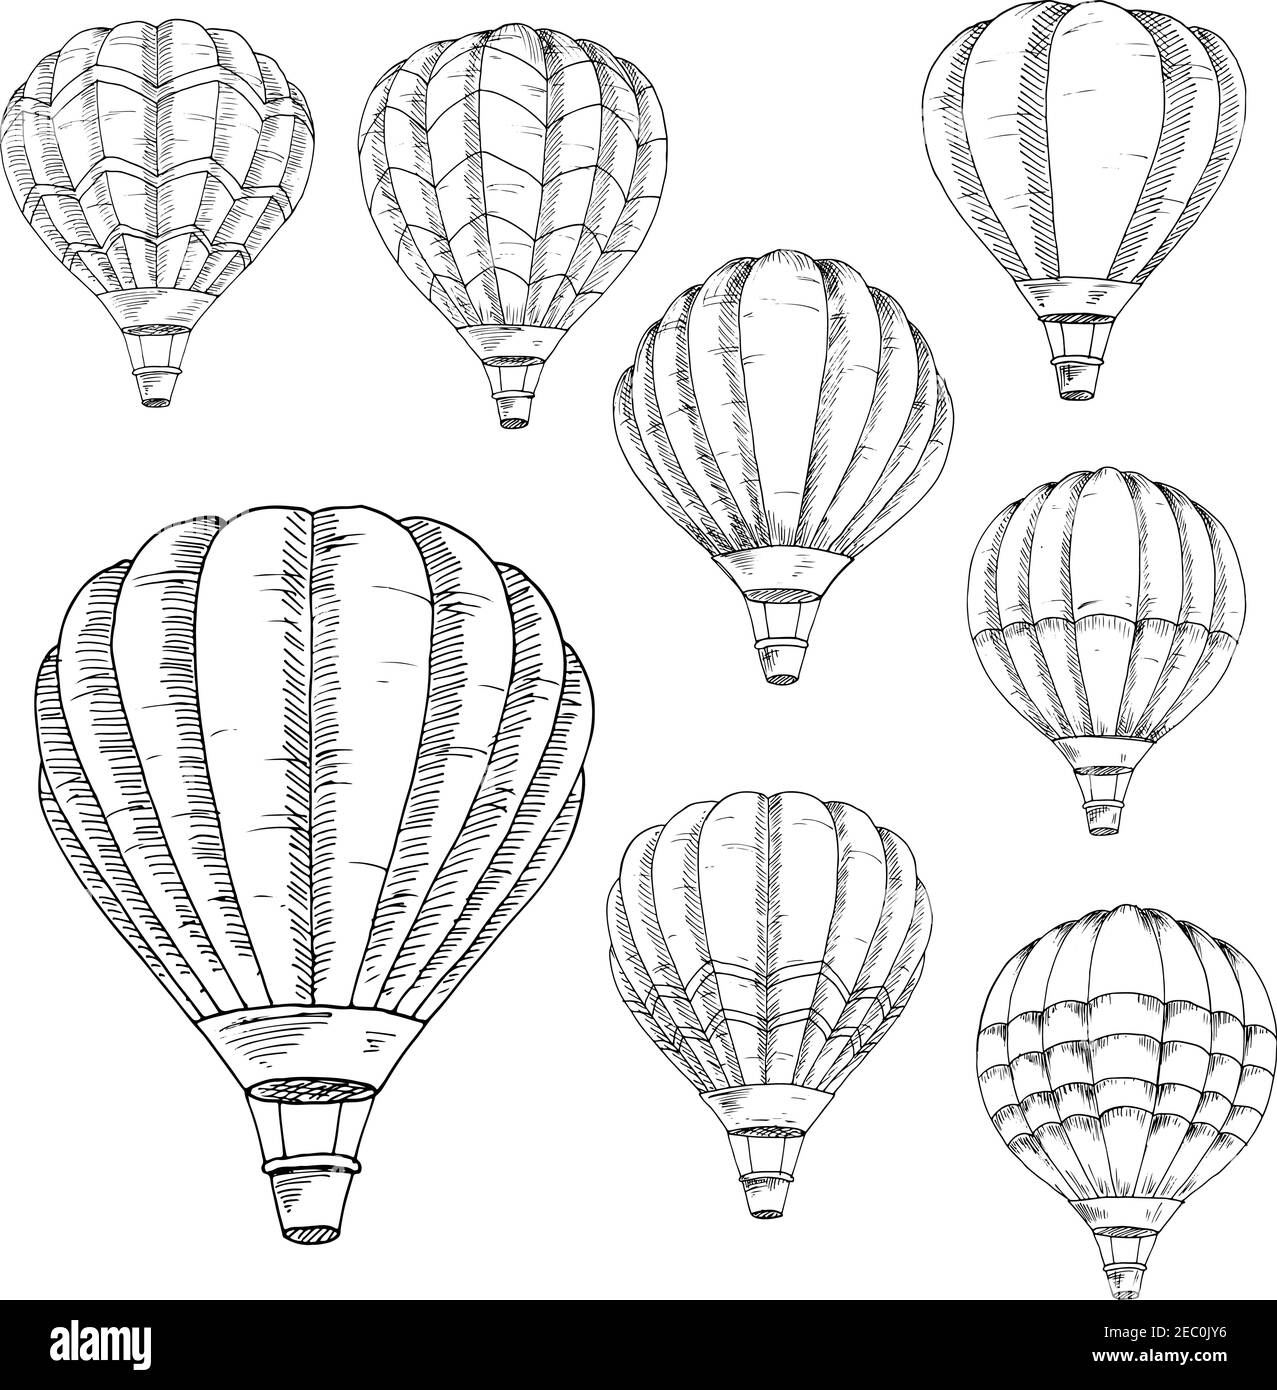 Sketched flying hot air balloons in vintage engraving style with lush envelopes. Air transportation, hobby, romantic weekend, travel design usage Stock Vector